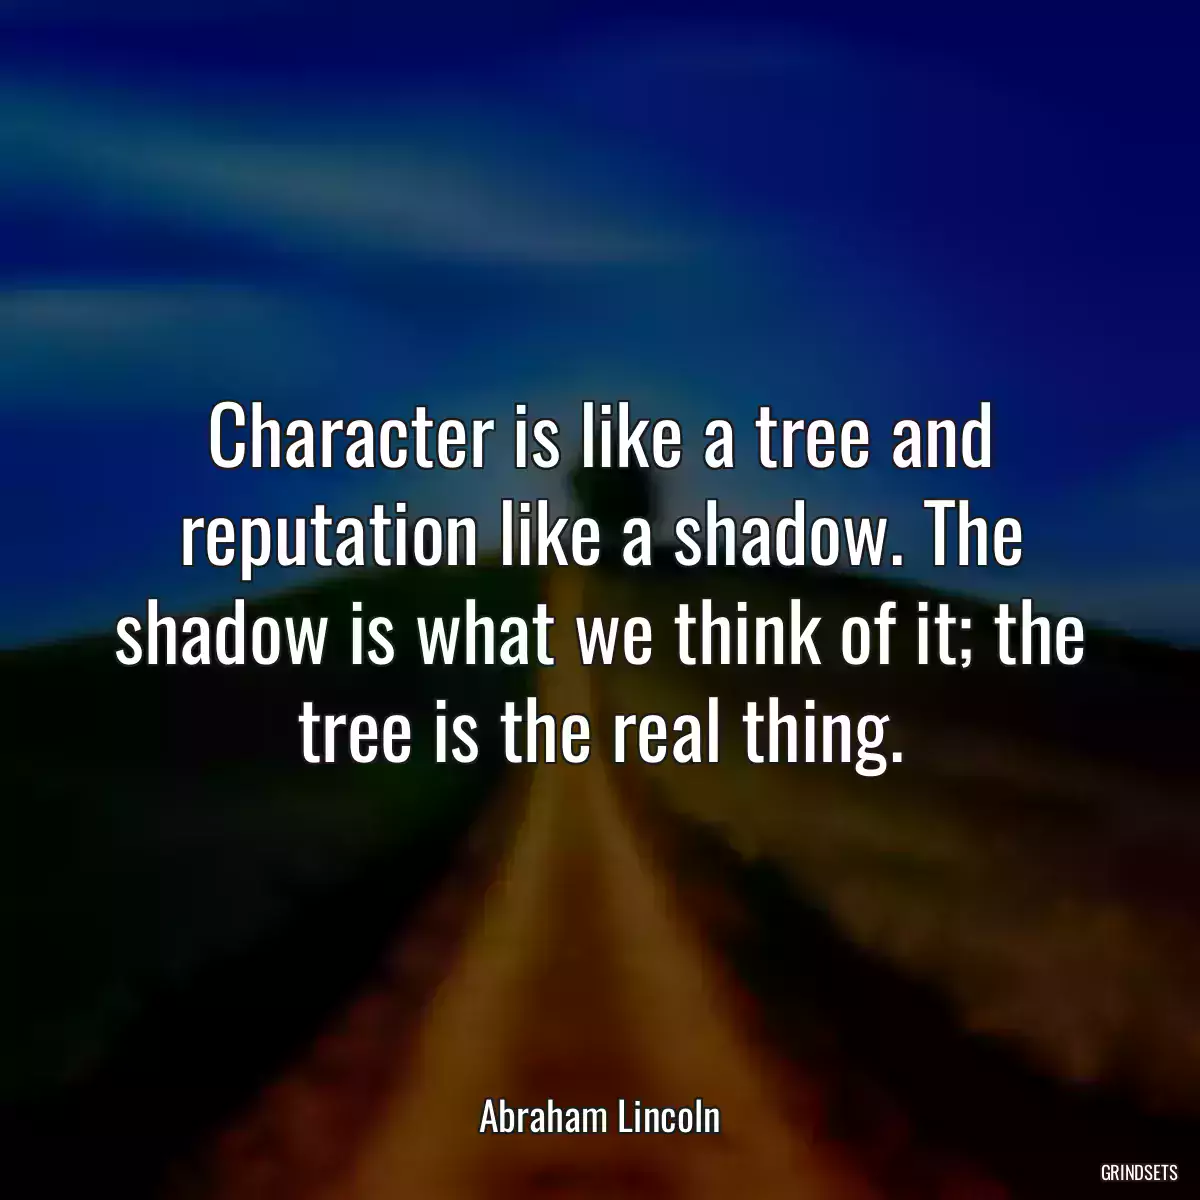 Character is like a tree and reputation like a shadow. The shadow is what we think of it; the tree is the real thing.